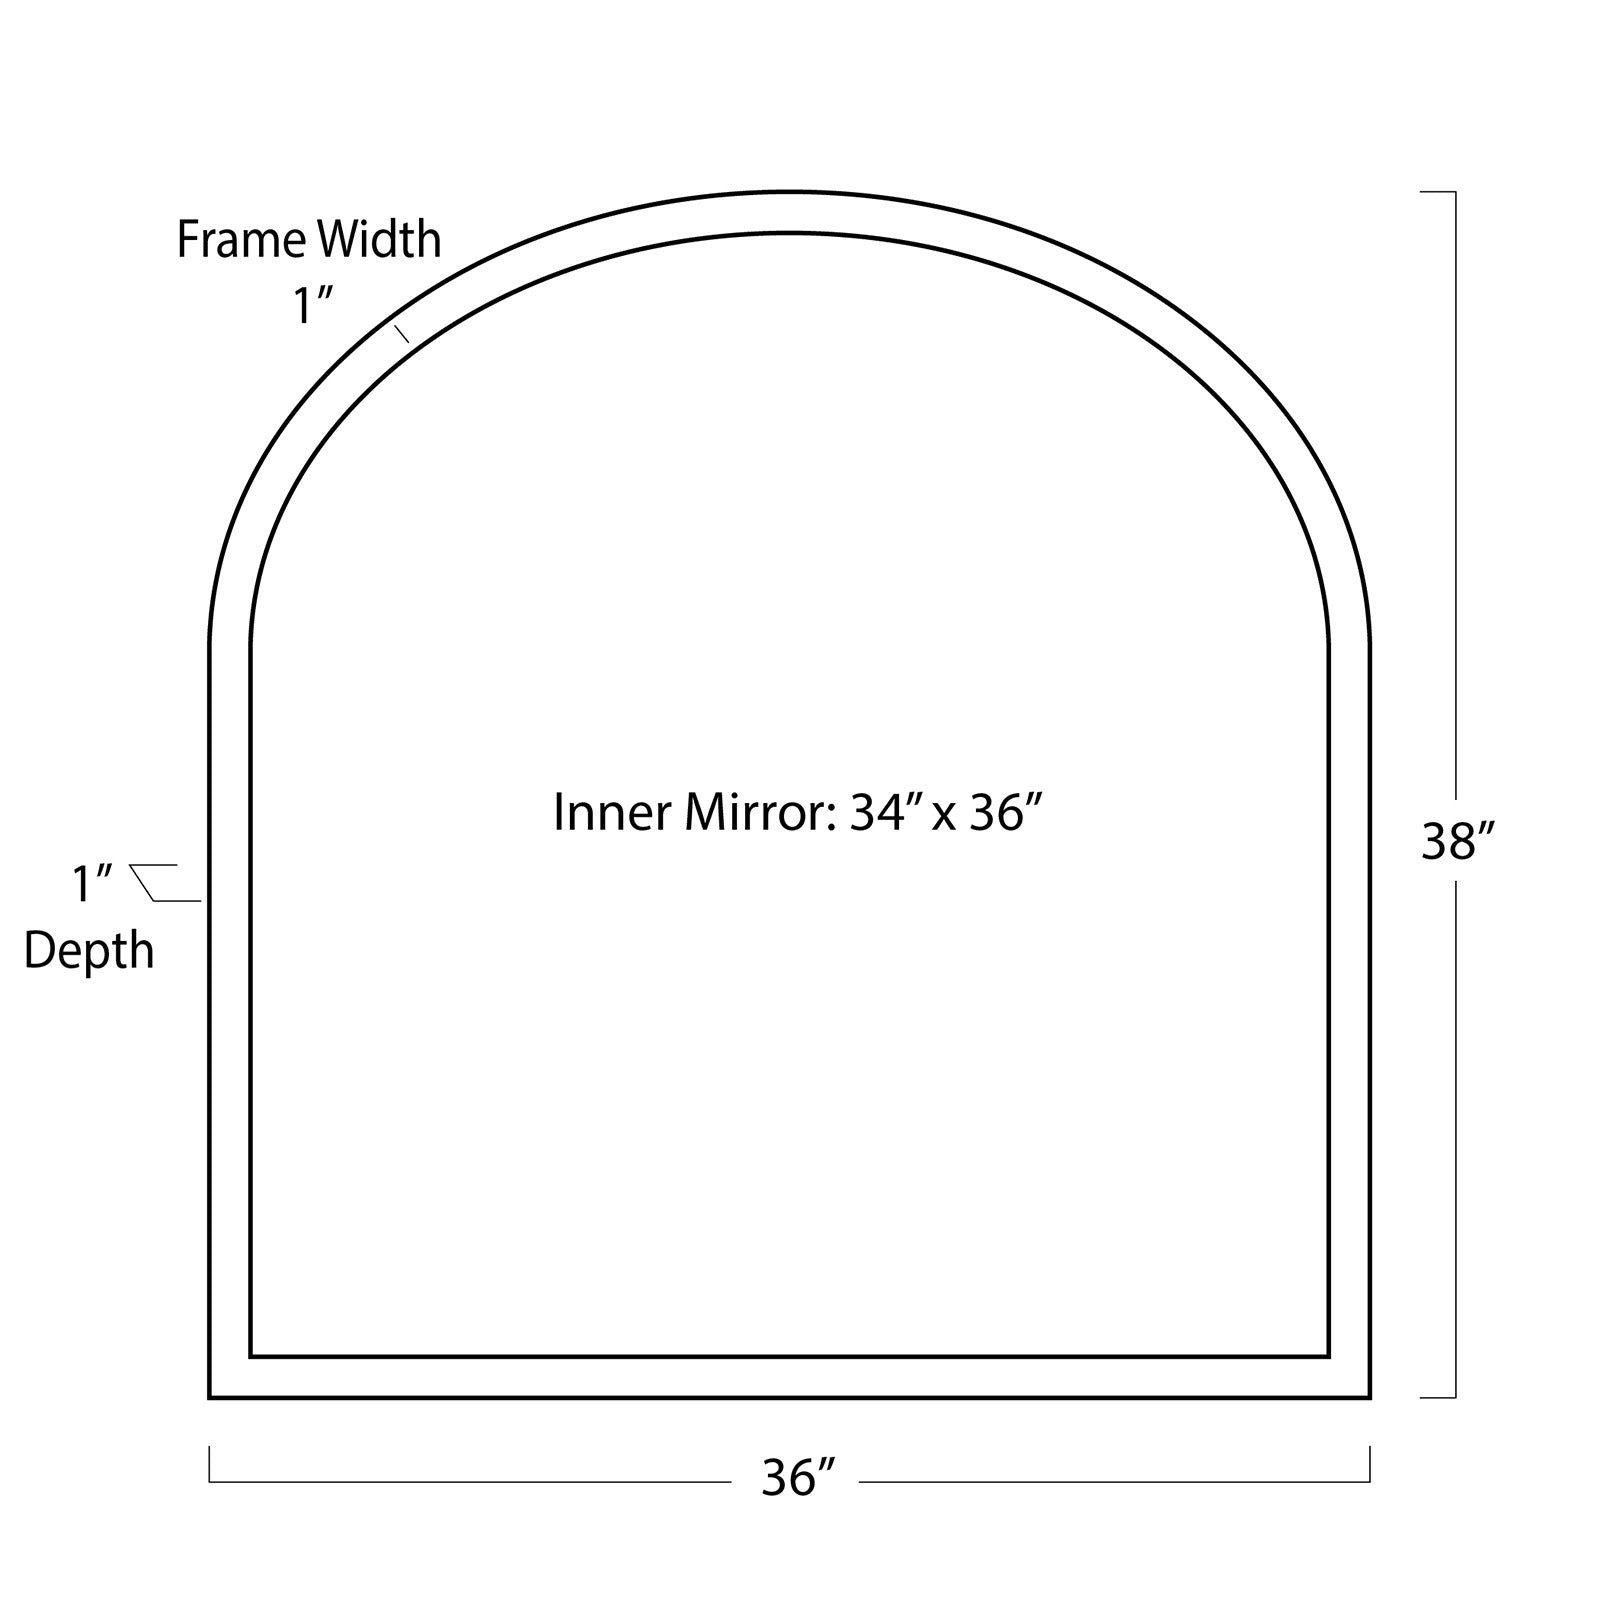 Knox Leather Mantle Mirror in Black by Regina Andrew